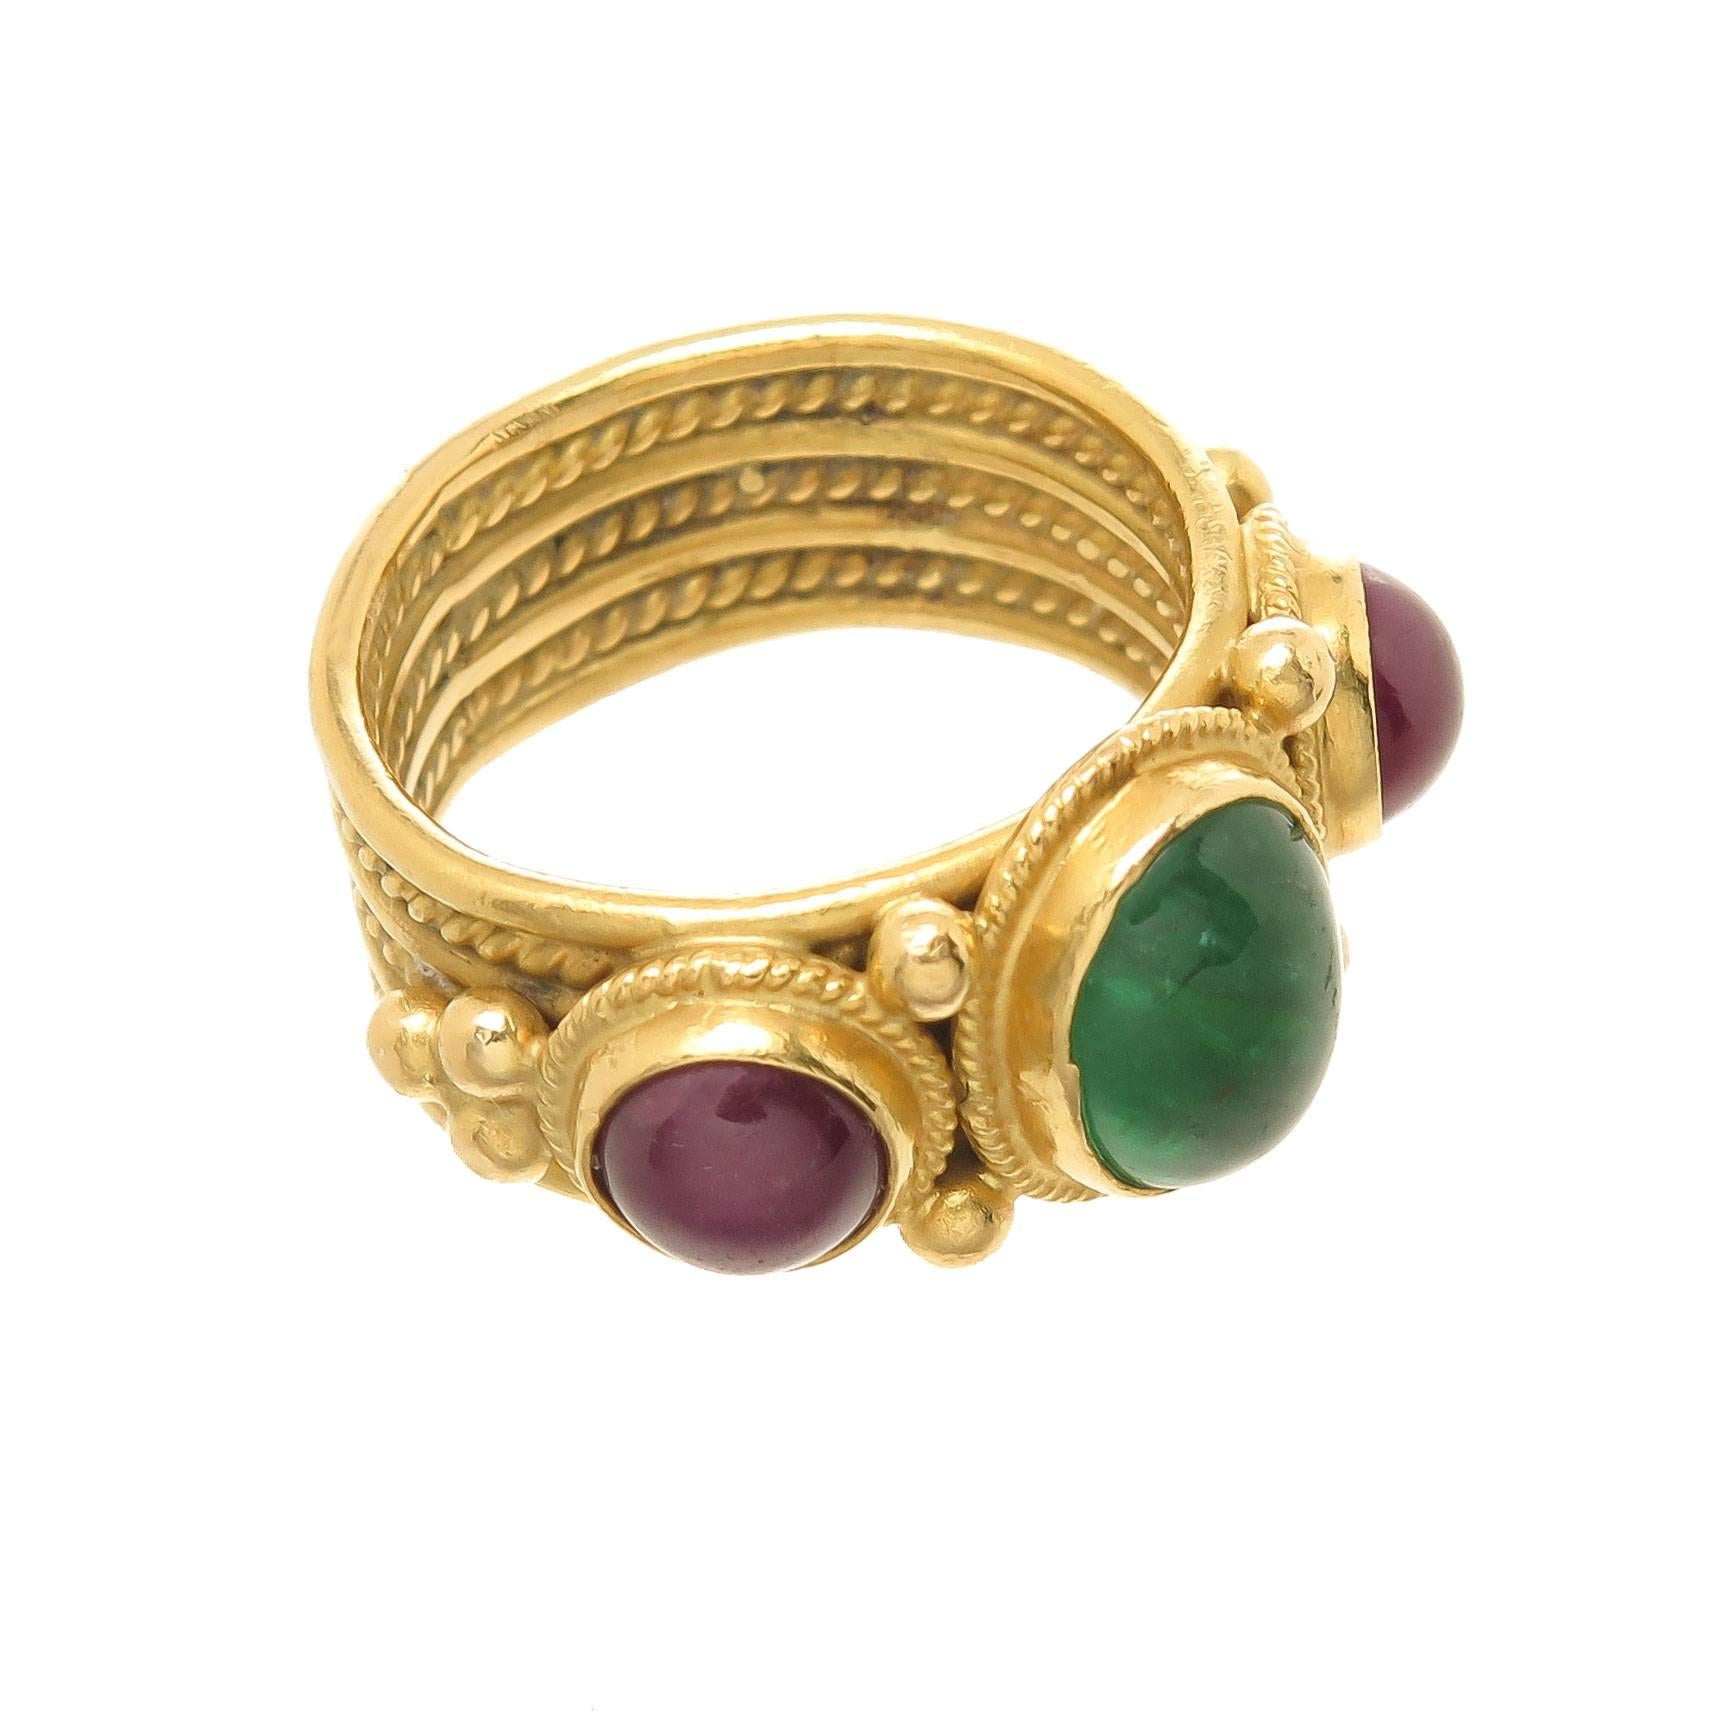 Circa 1990s Lalaounis 18k Yellow Gold band ring in the Greek Revival style, typical of Lalaounis jewelry, measuring 5/16 inch wide, the top is centrally set with an Oval Cabochon Emerald of approximately 2 Carats and further set on either side with